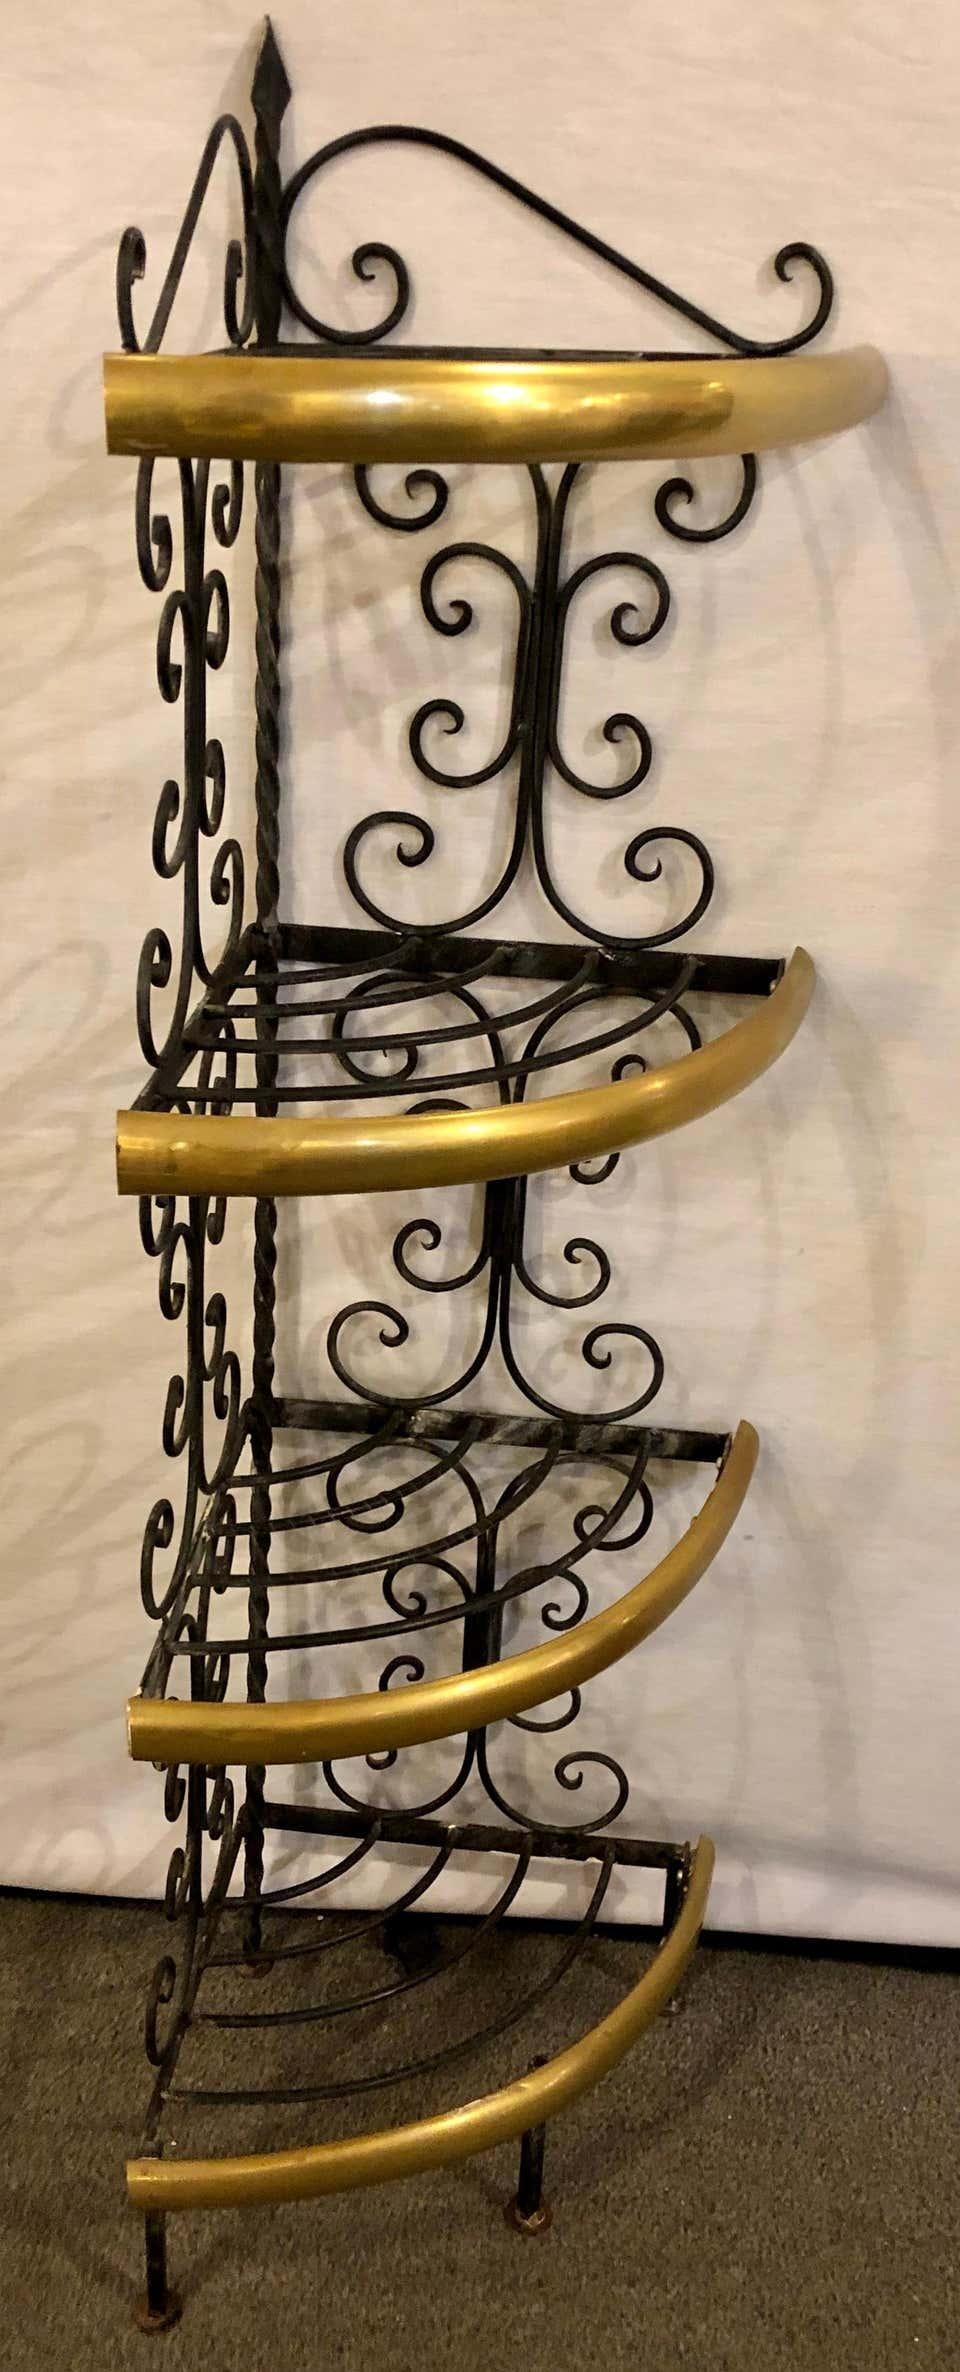 Brass and wrought iron four-tier diminutive bakers rack in demilune shape. A sweet addition to any kitchen or serving area is this sleek and stylish bakers rack. The wrought iron frame having brass bow front mounts. The whole with four shelves for